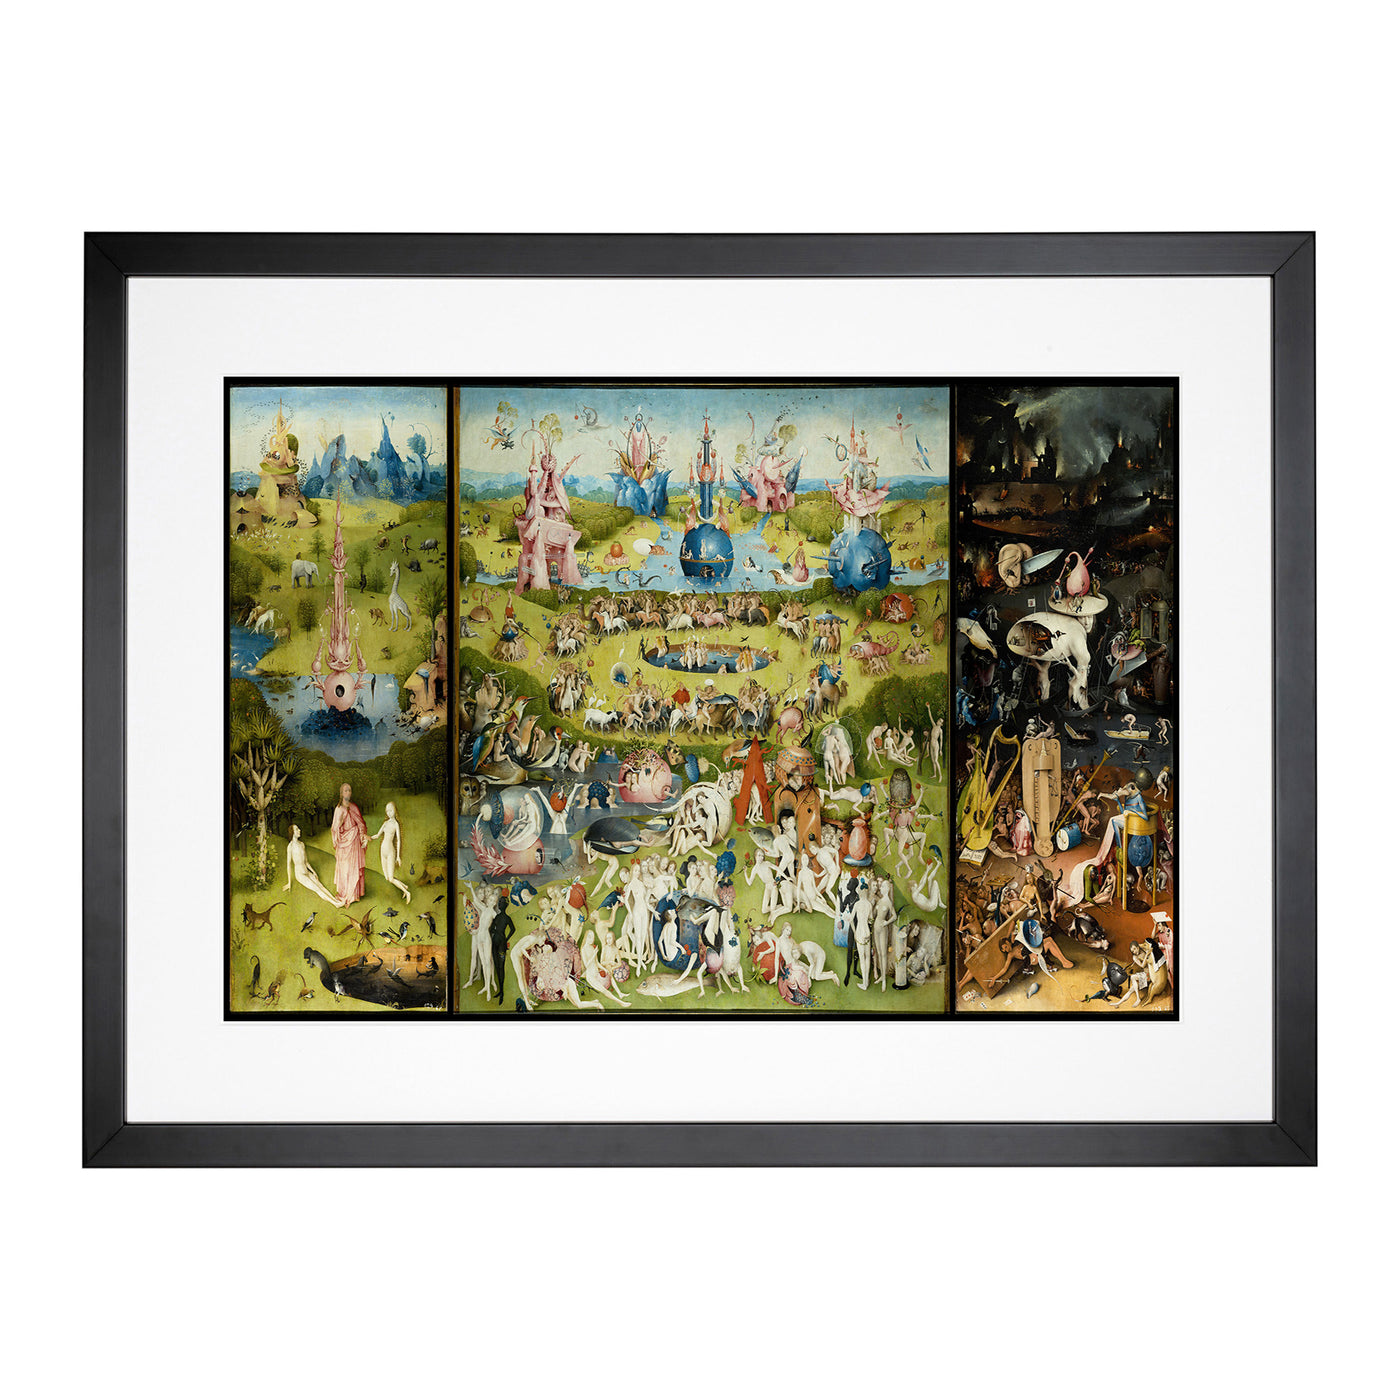 The Garden Of Earthly Delights By Hieronymus Bosch